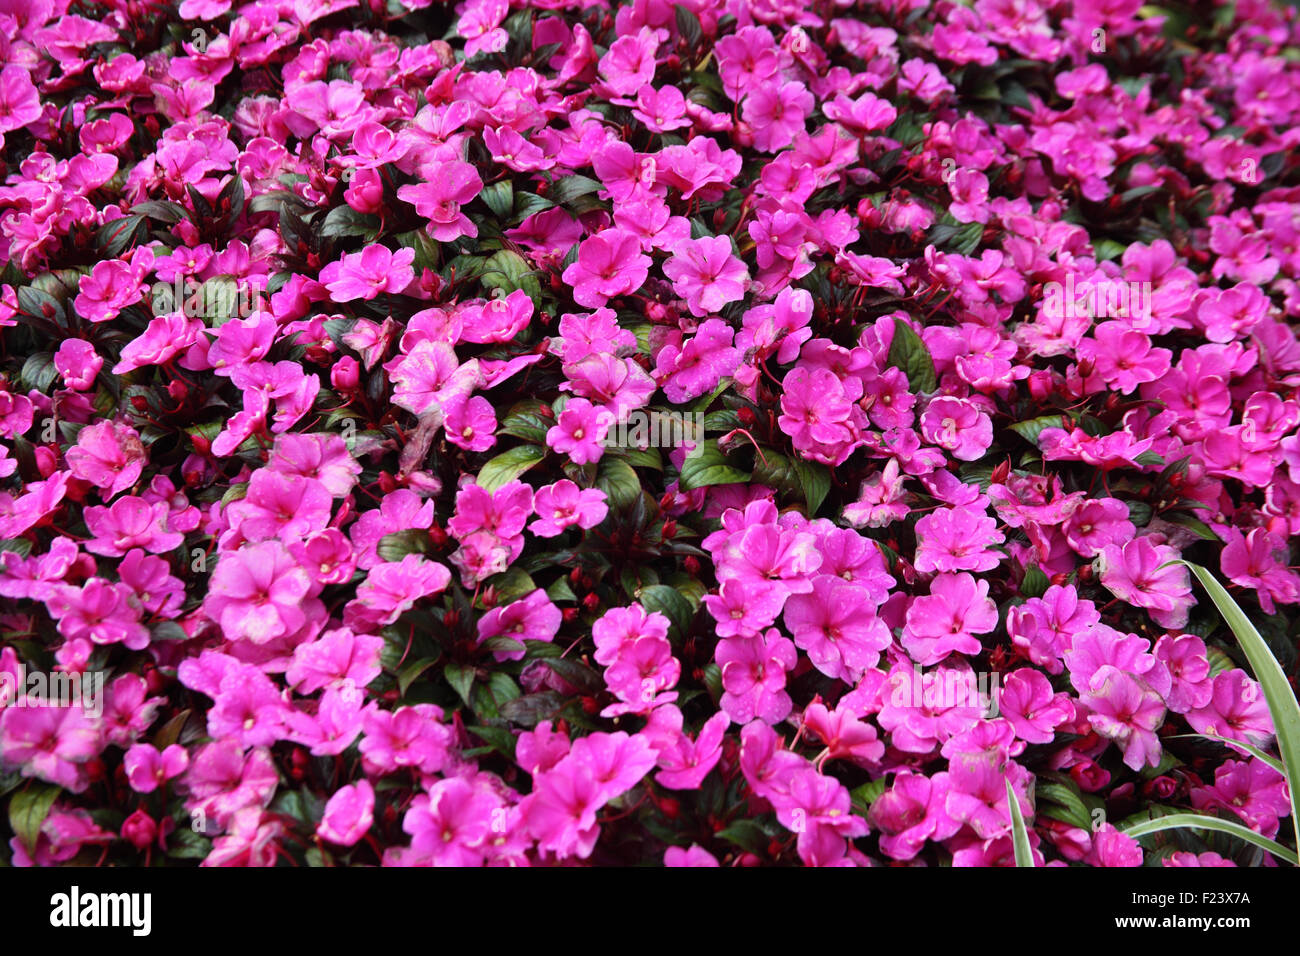 Impatiens walleriana 'Accent series' close up of flowers Stock Photo